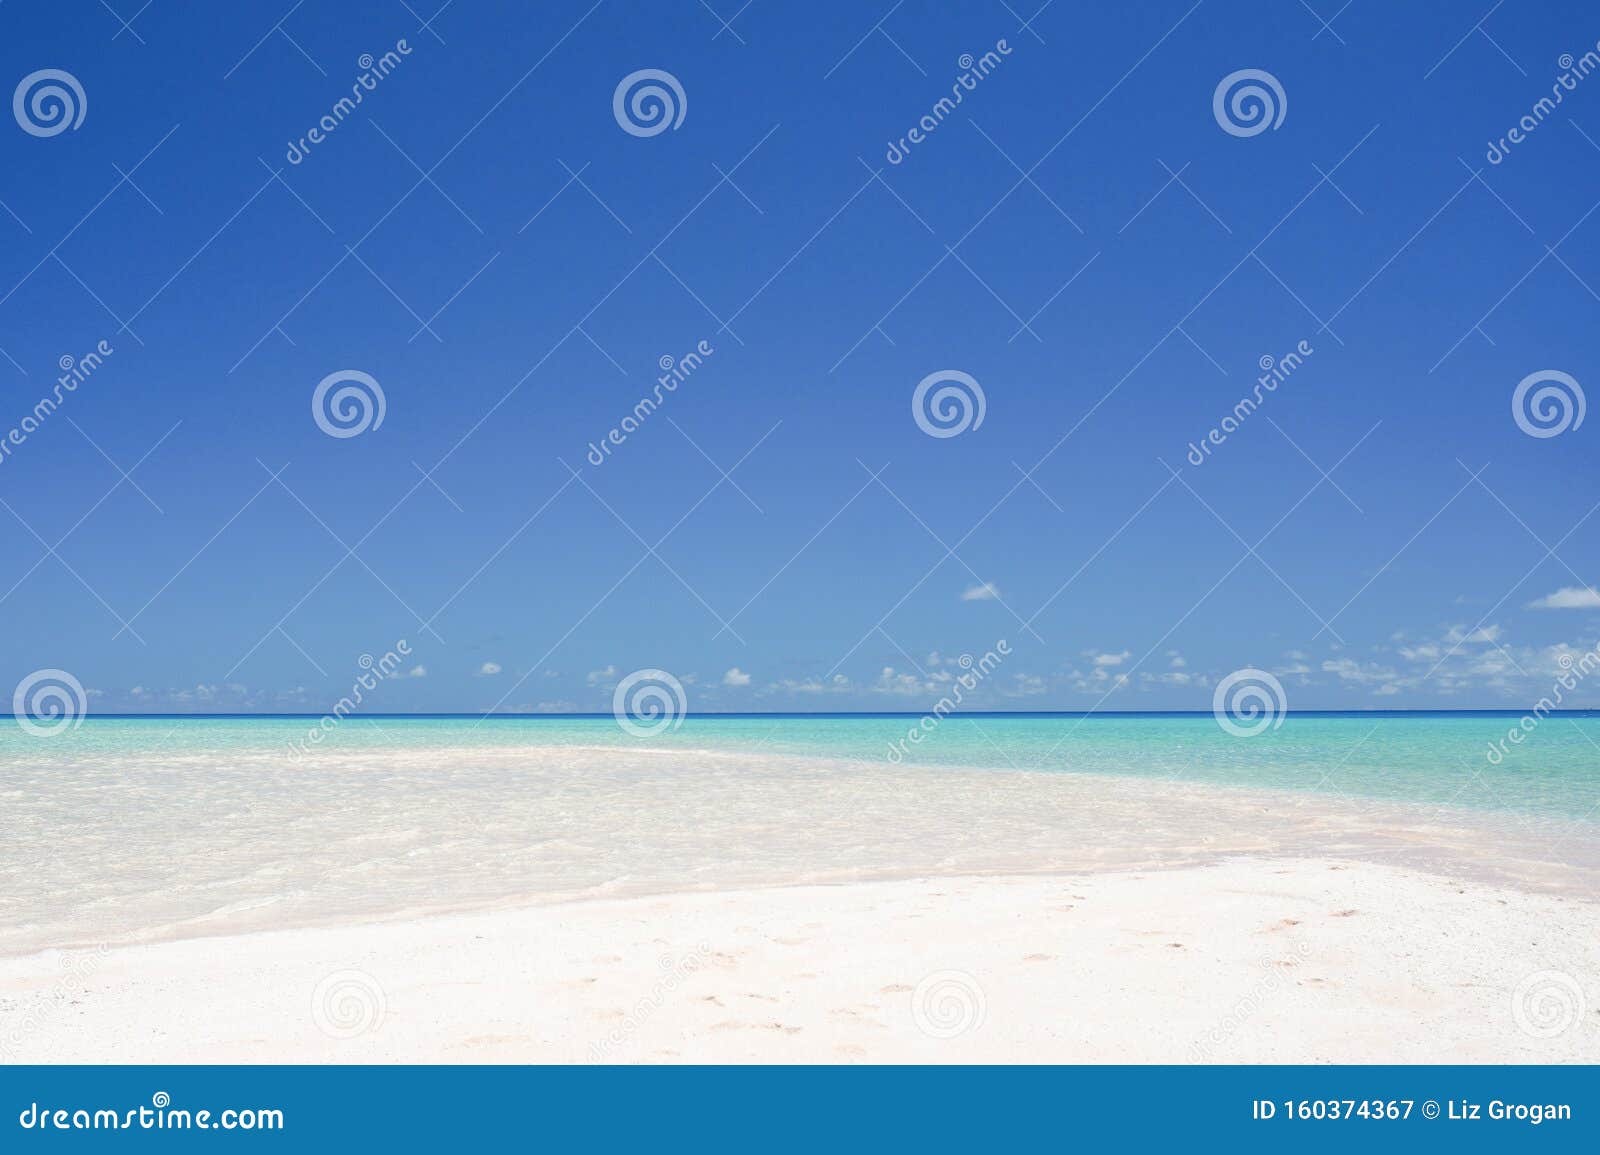 Landscape Of A White Sandy Beach Leading Into Turquoise Waters Under A